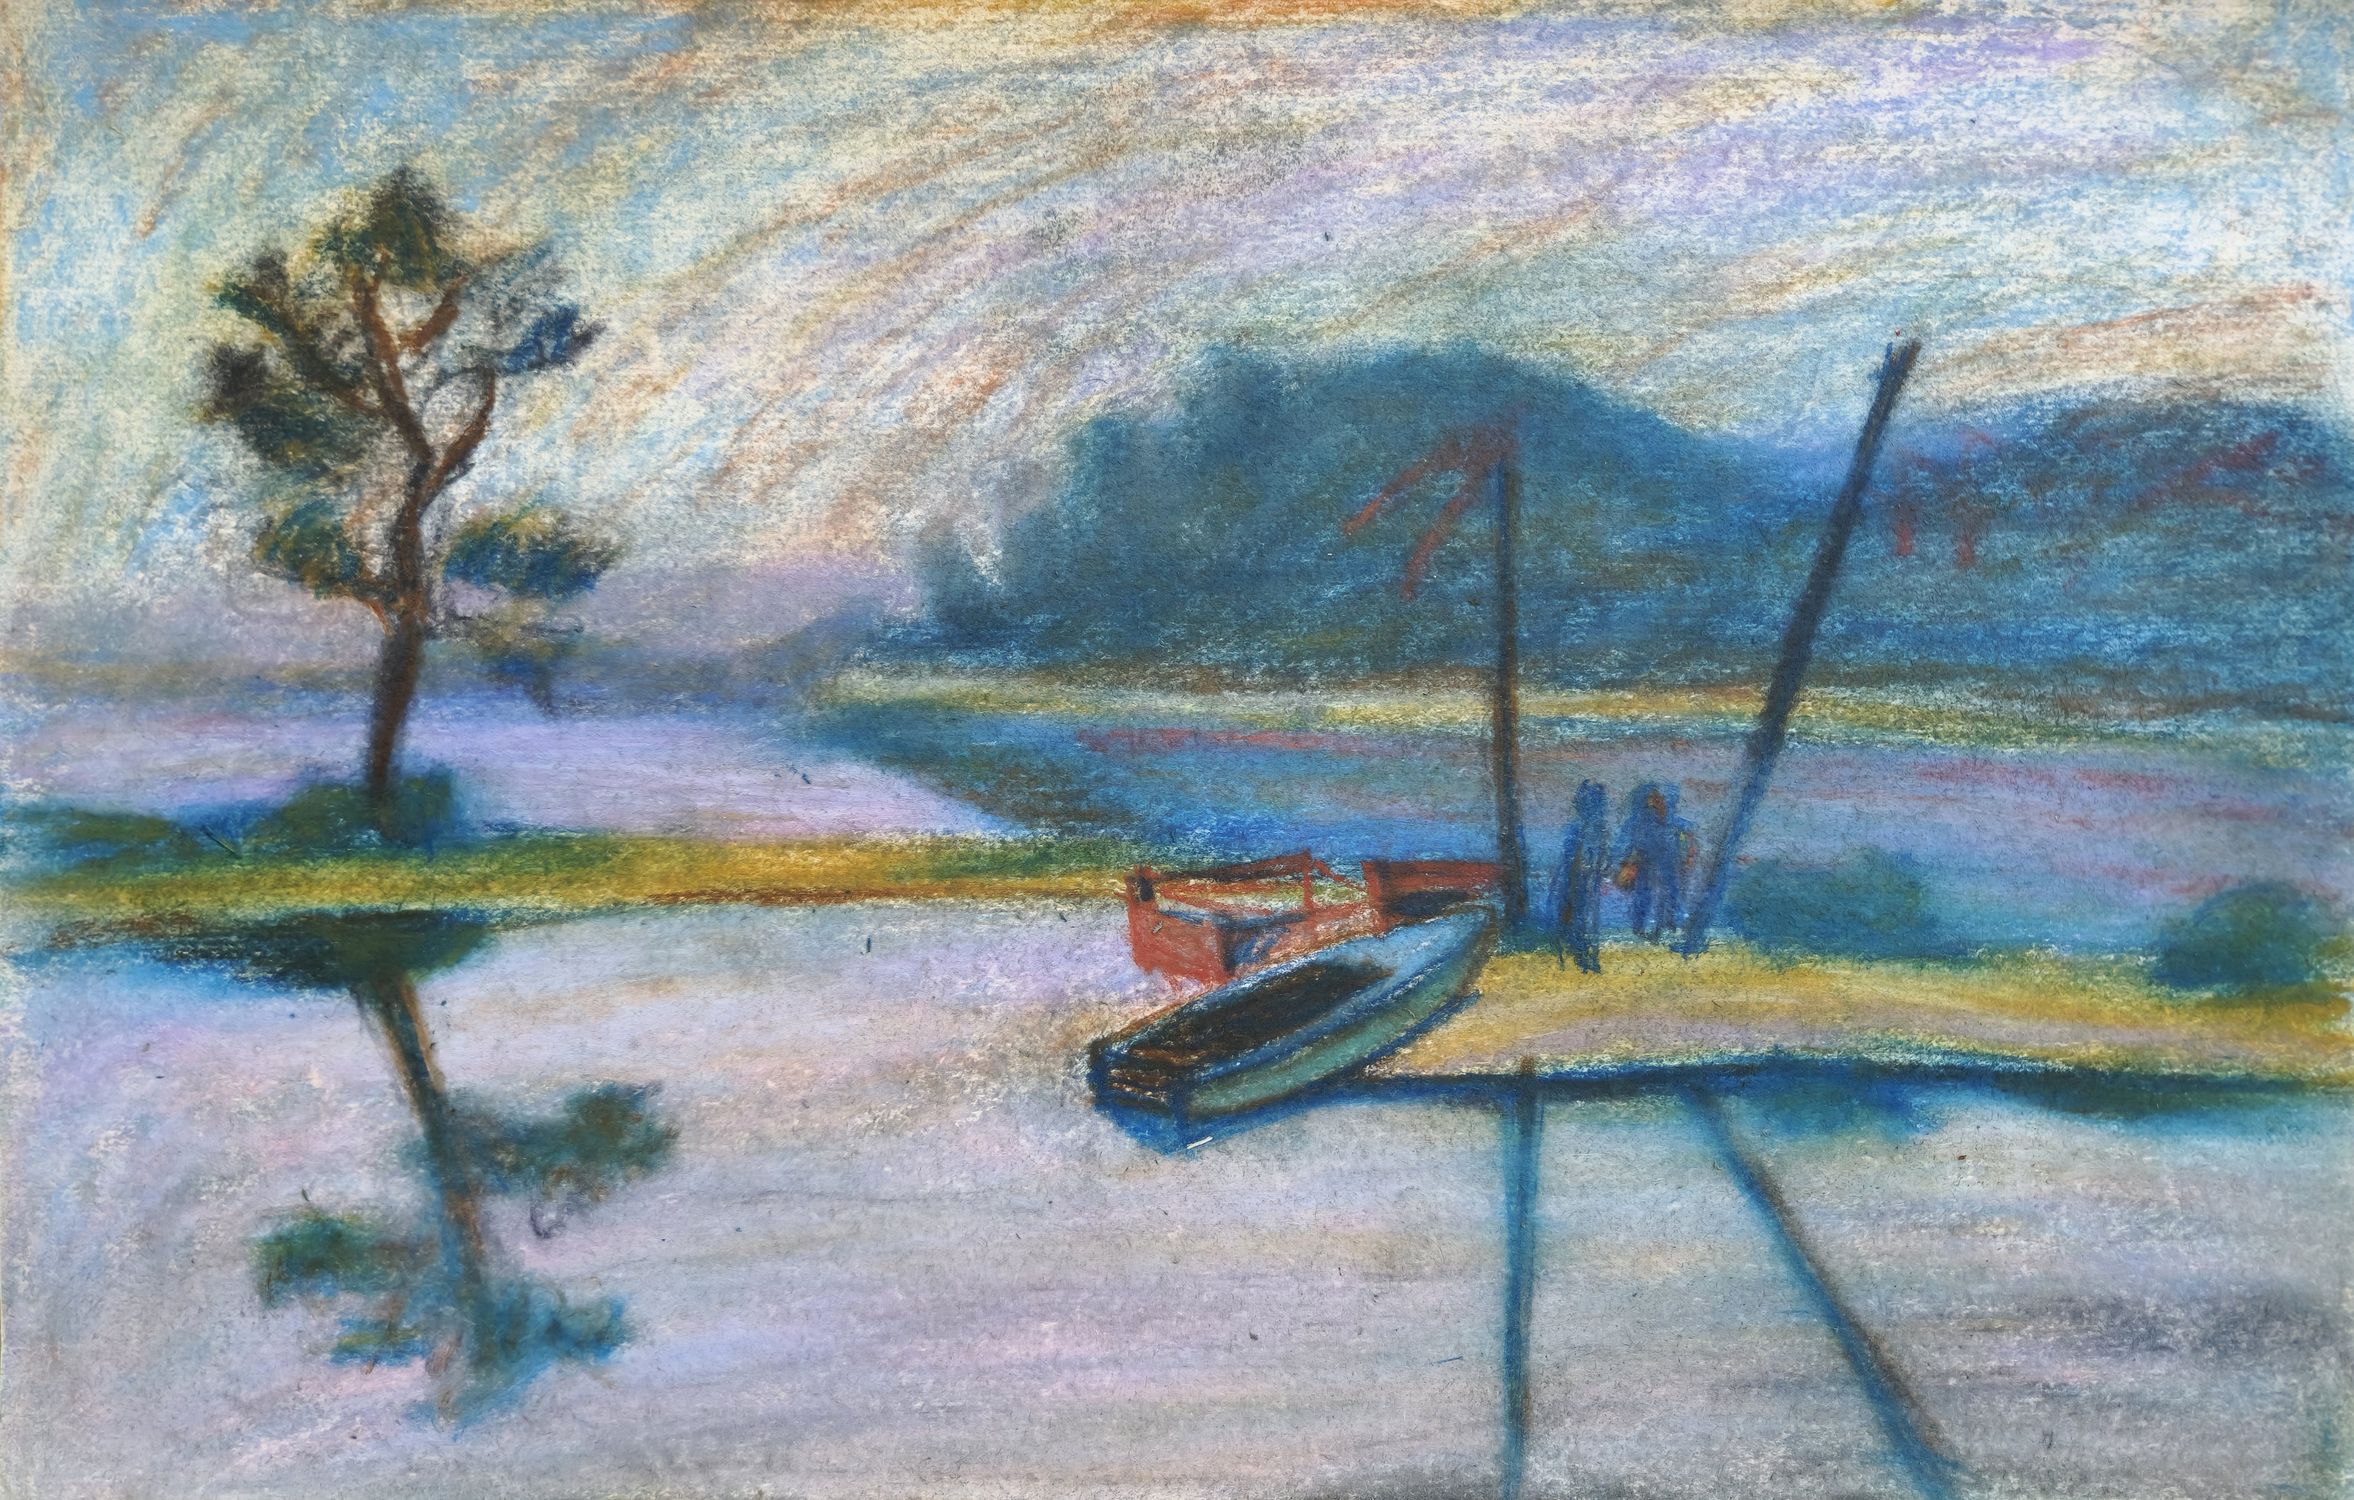 "Boats on the shore"